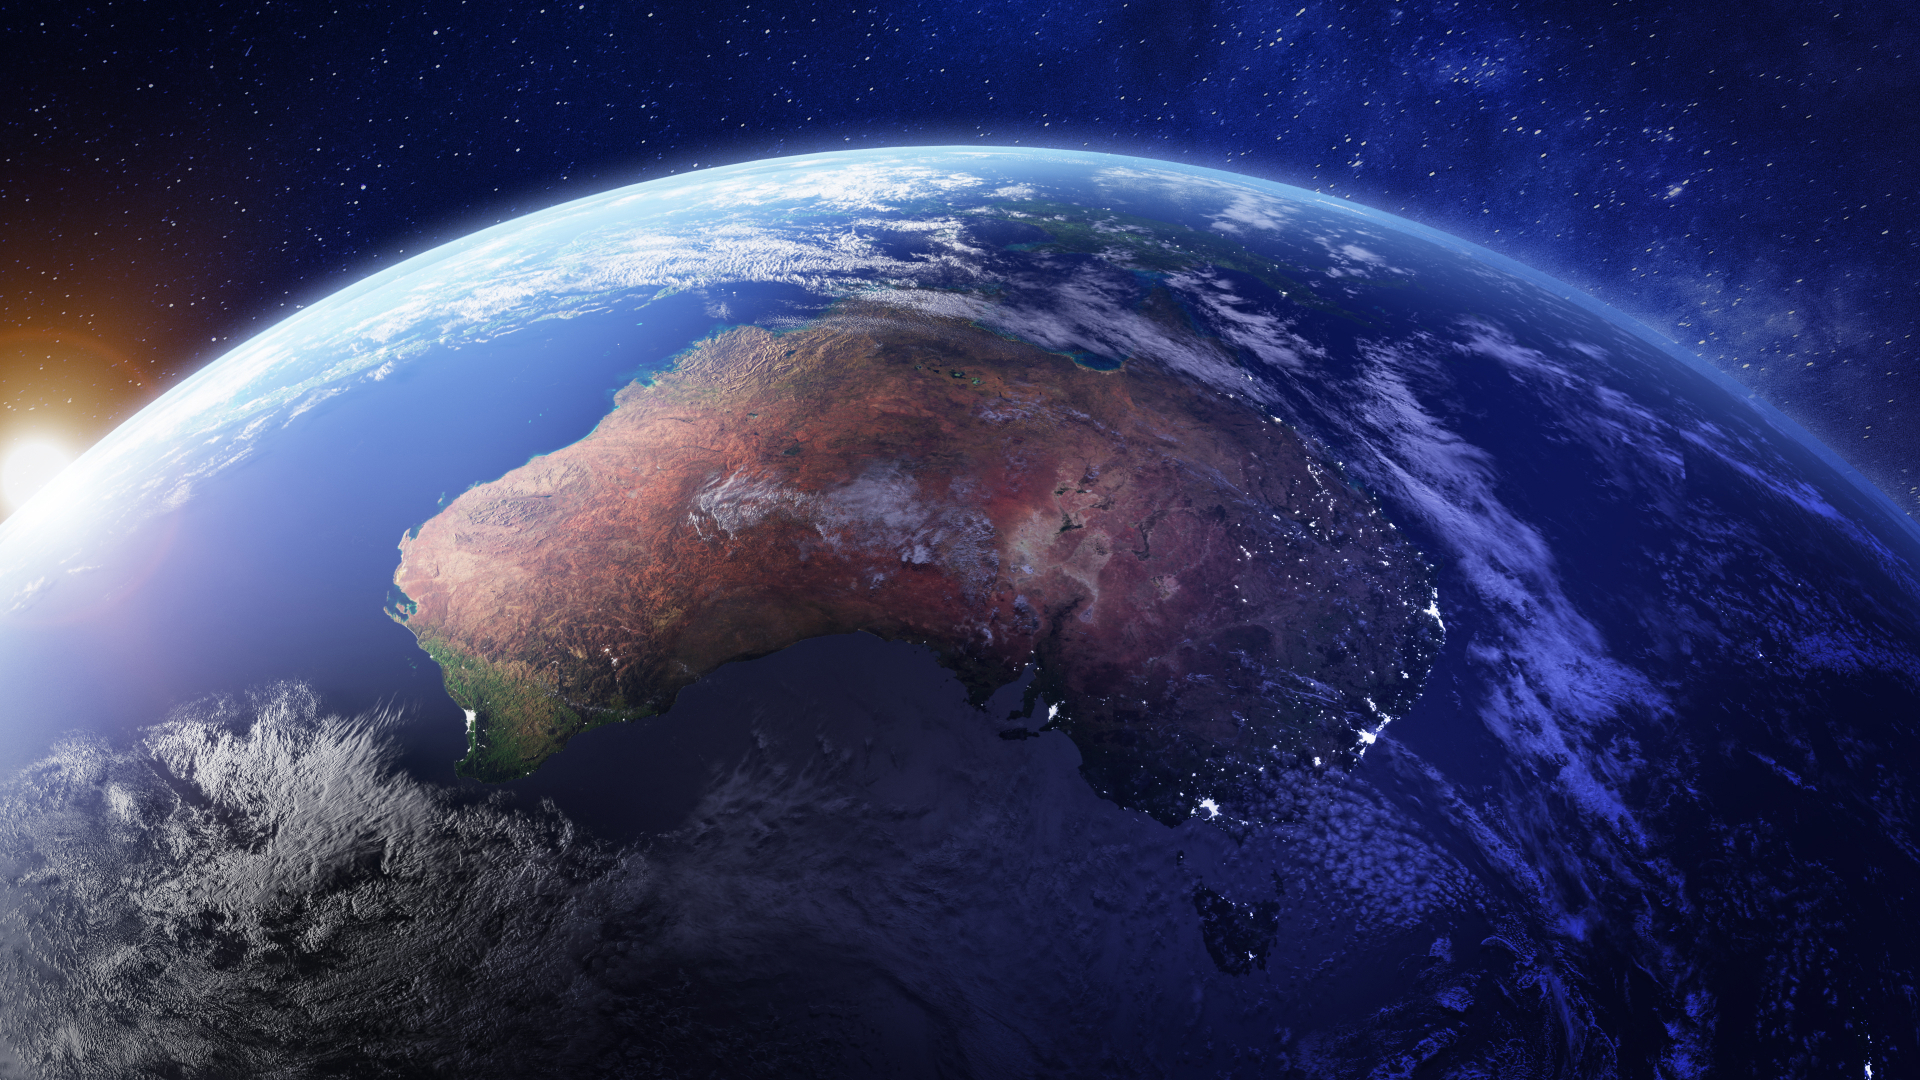 Australia seen from outer space